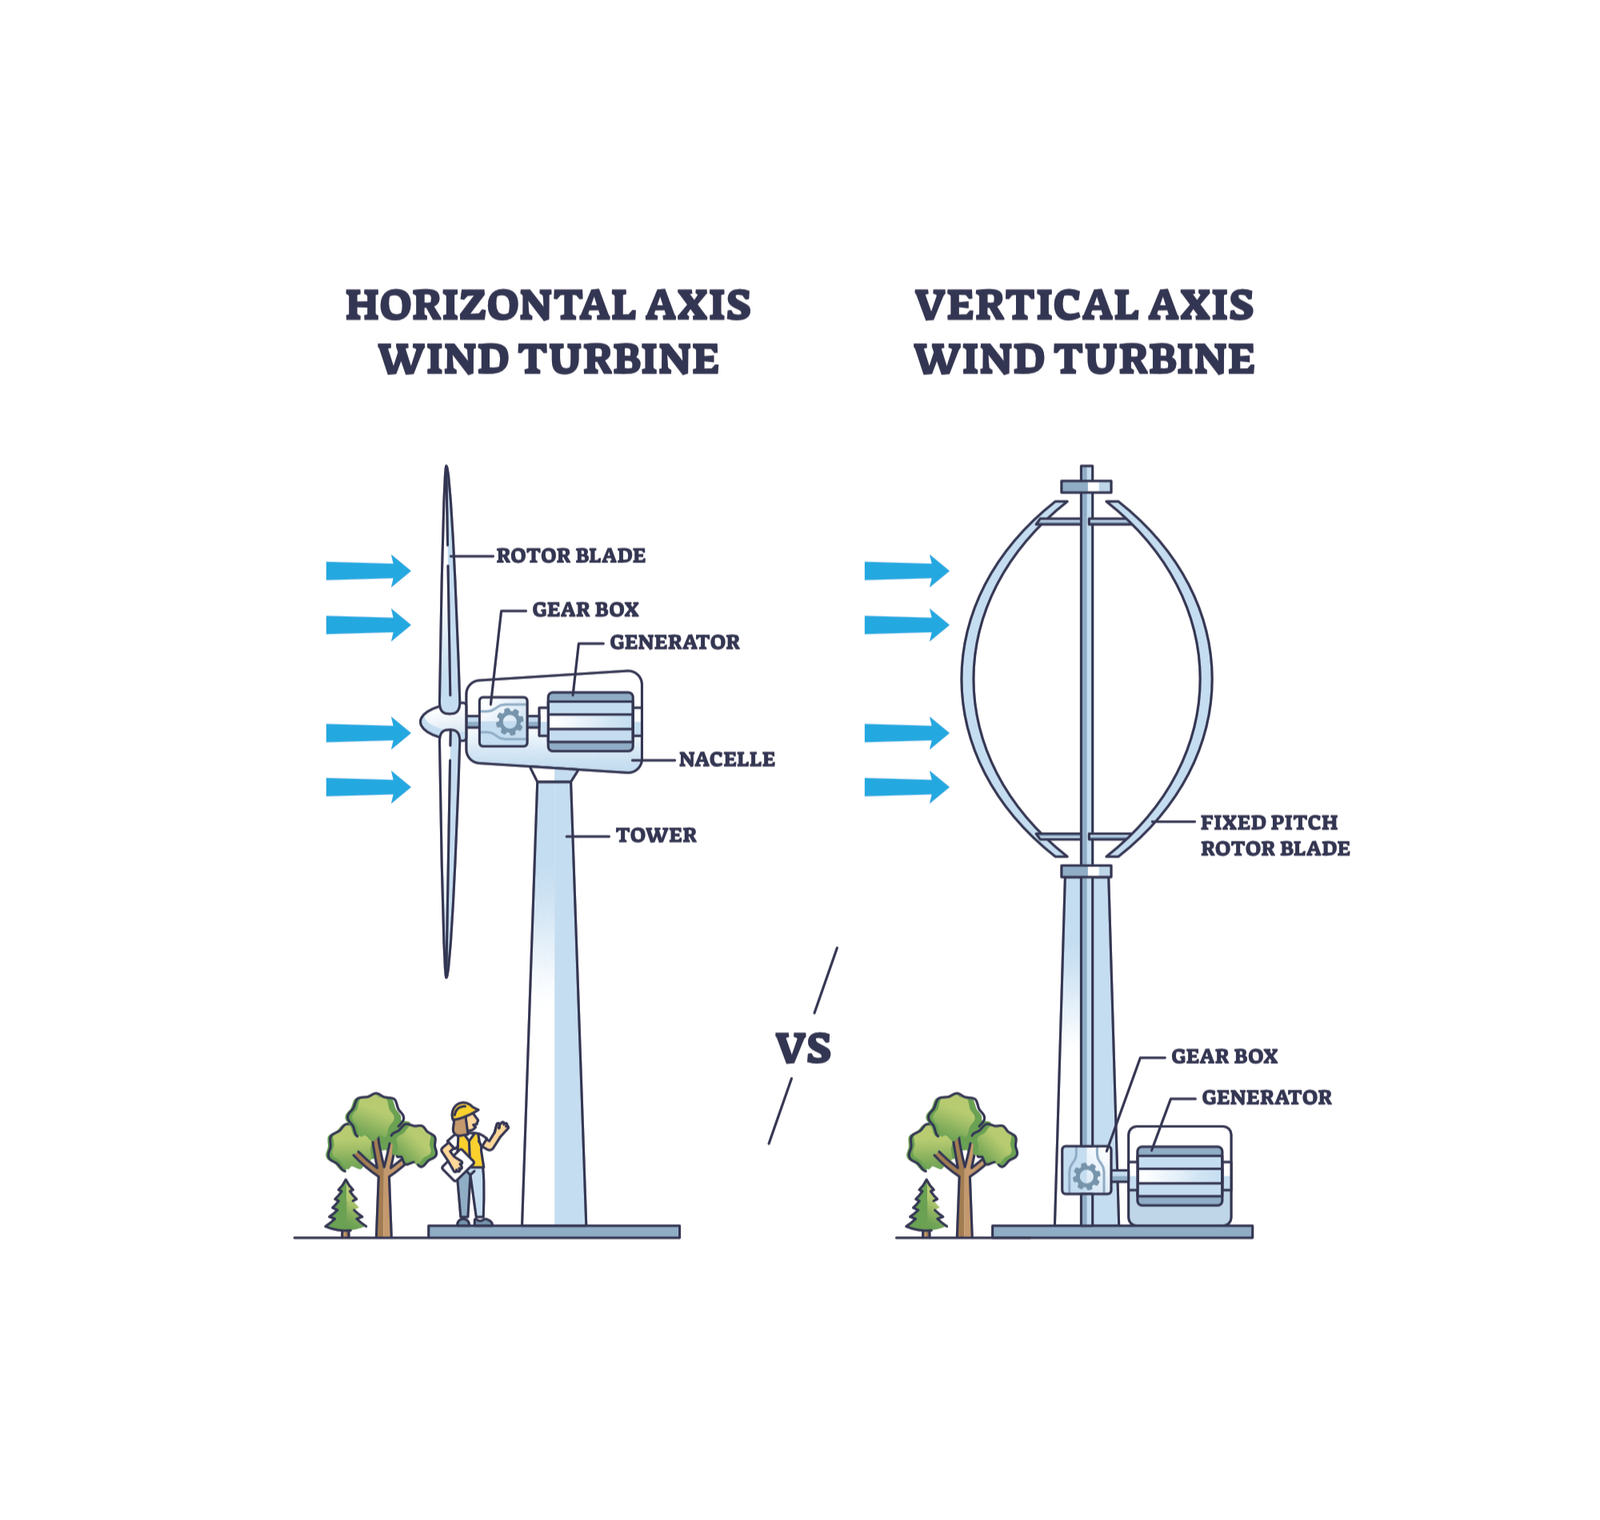 Wind Energy at Home: How to Choose Between Horizontal and Vertical Axis Wind Turbines.